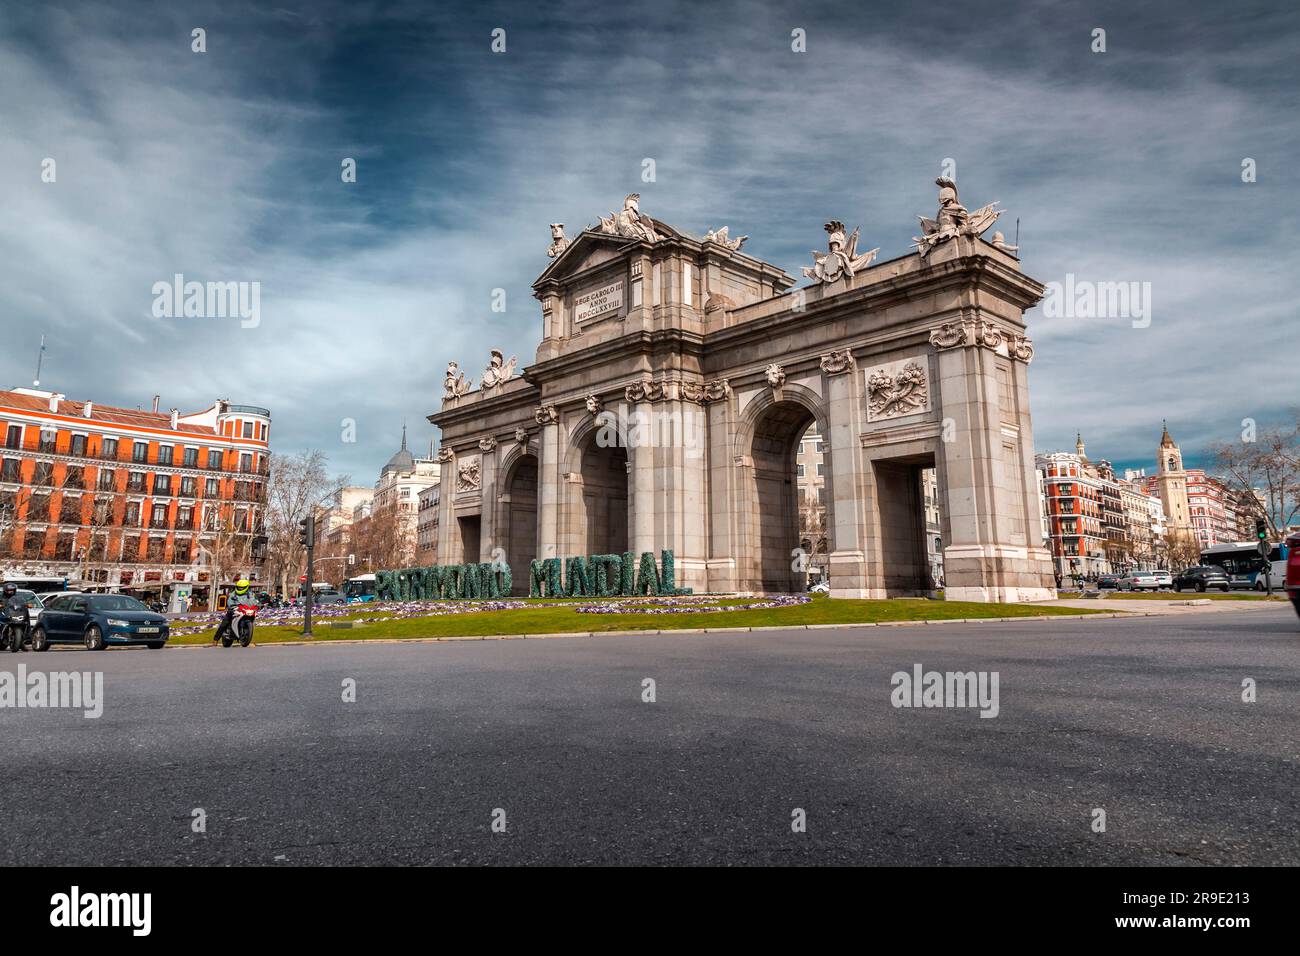 Madrid, Spain - Feb 16, 2022: The Puerta de Alcala is a Neoclassical gate in the Plaza de la Independencia in Madrid, Spain. Stock Photo